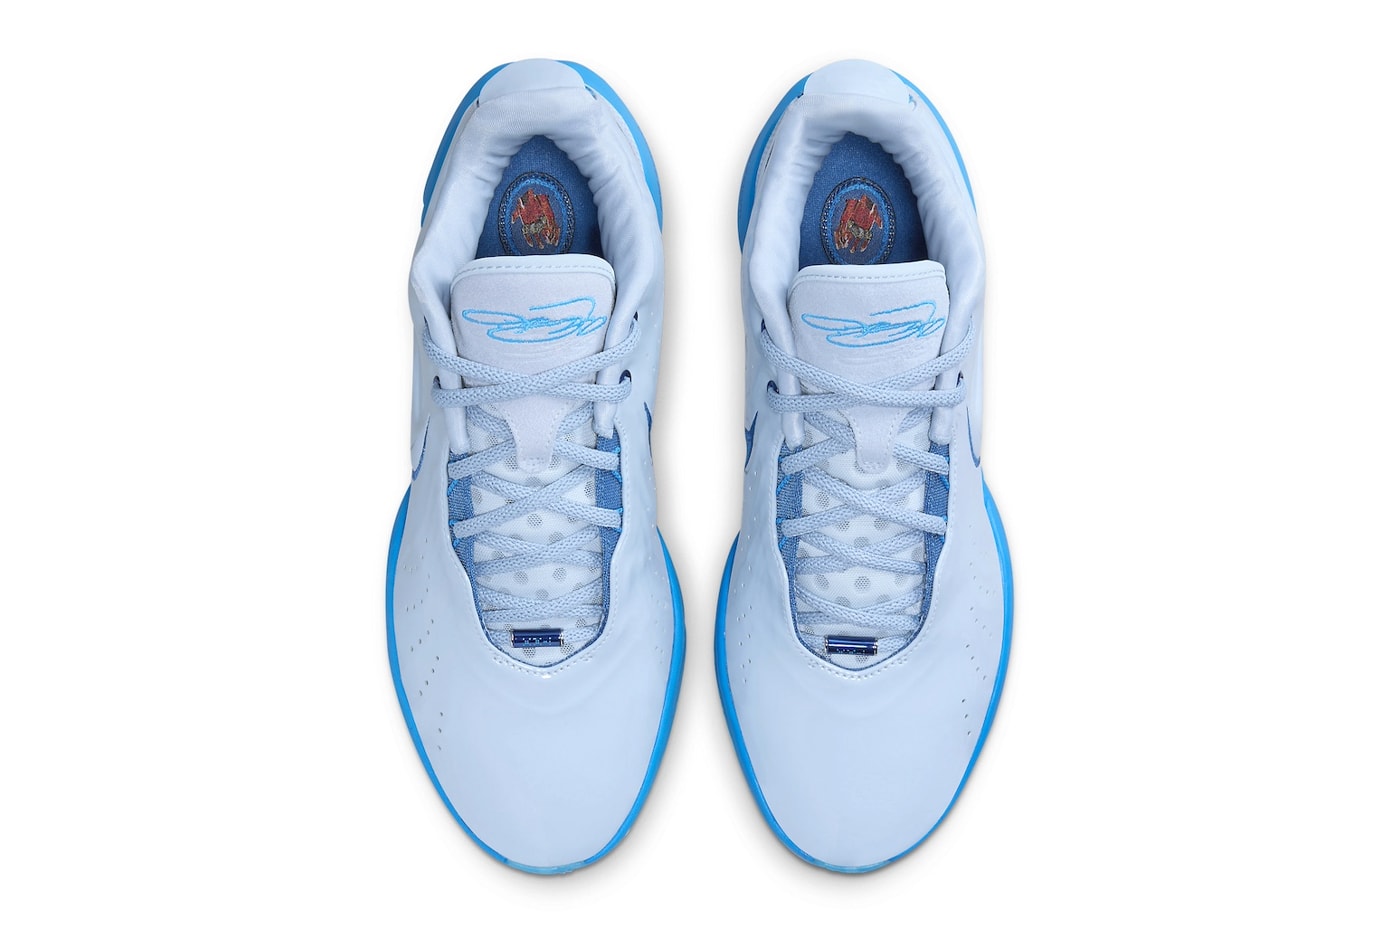 Official Look at the Nike LeBron 21 "Blue Diver" FQ4052-400 lebron james king basketball los angeles laker nba shoes all blue leather Light Armory Blue/Court Blue-Blue Hero